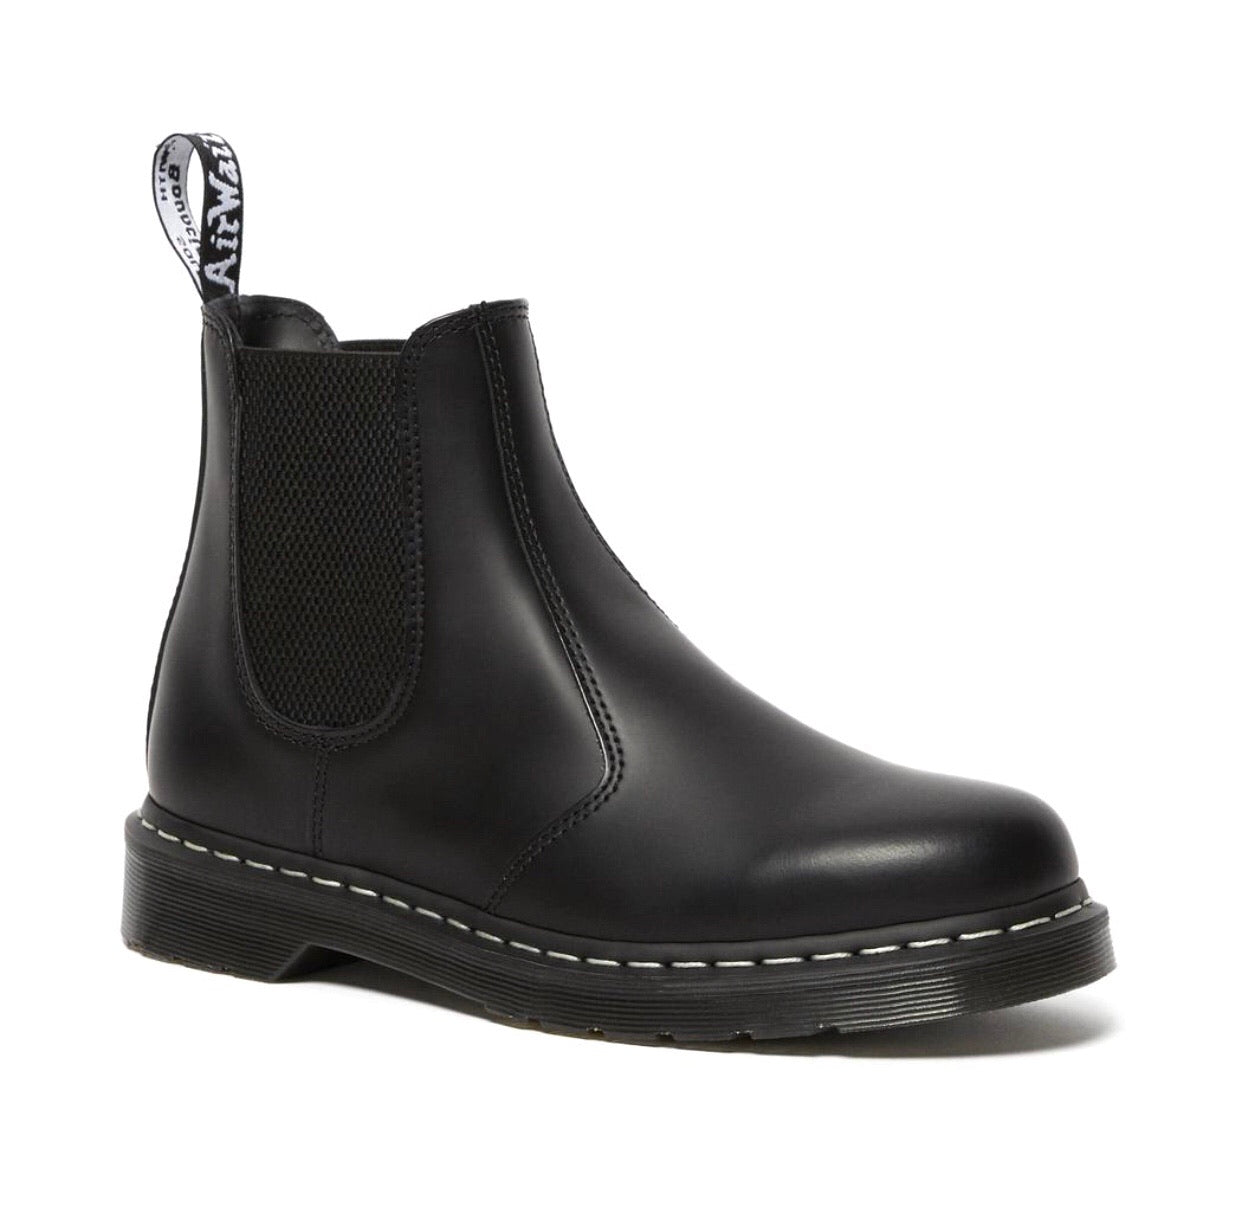 Dr. Martens 2976 Black White Stitch Chelsea Boot Redpath Shoes Canberra